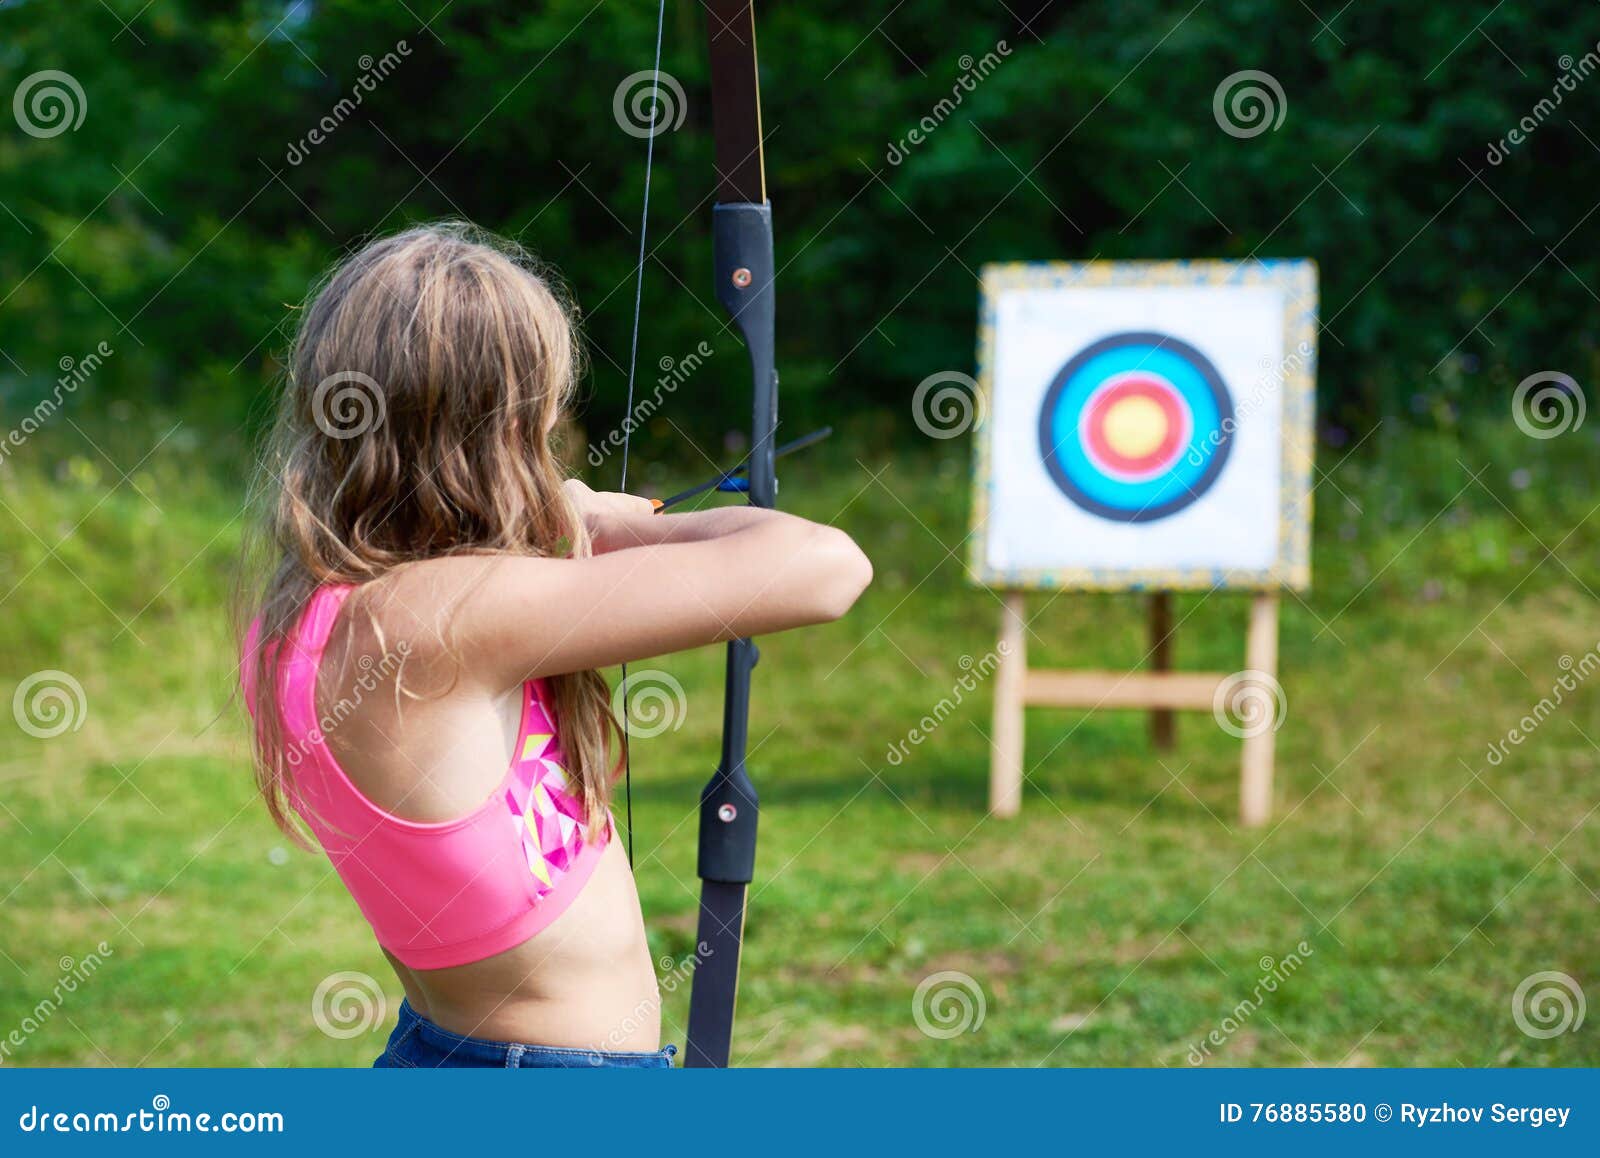 girl teenager with bow nock and aims to target